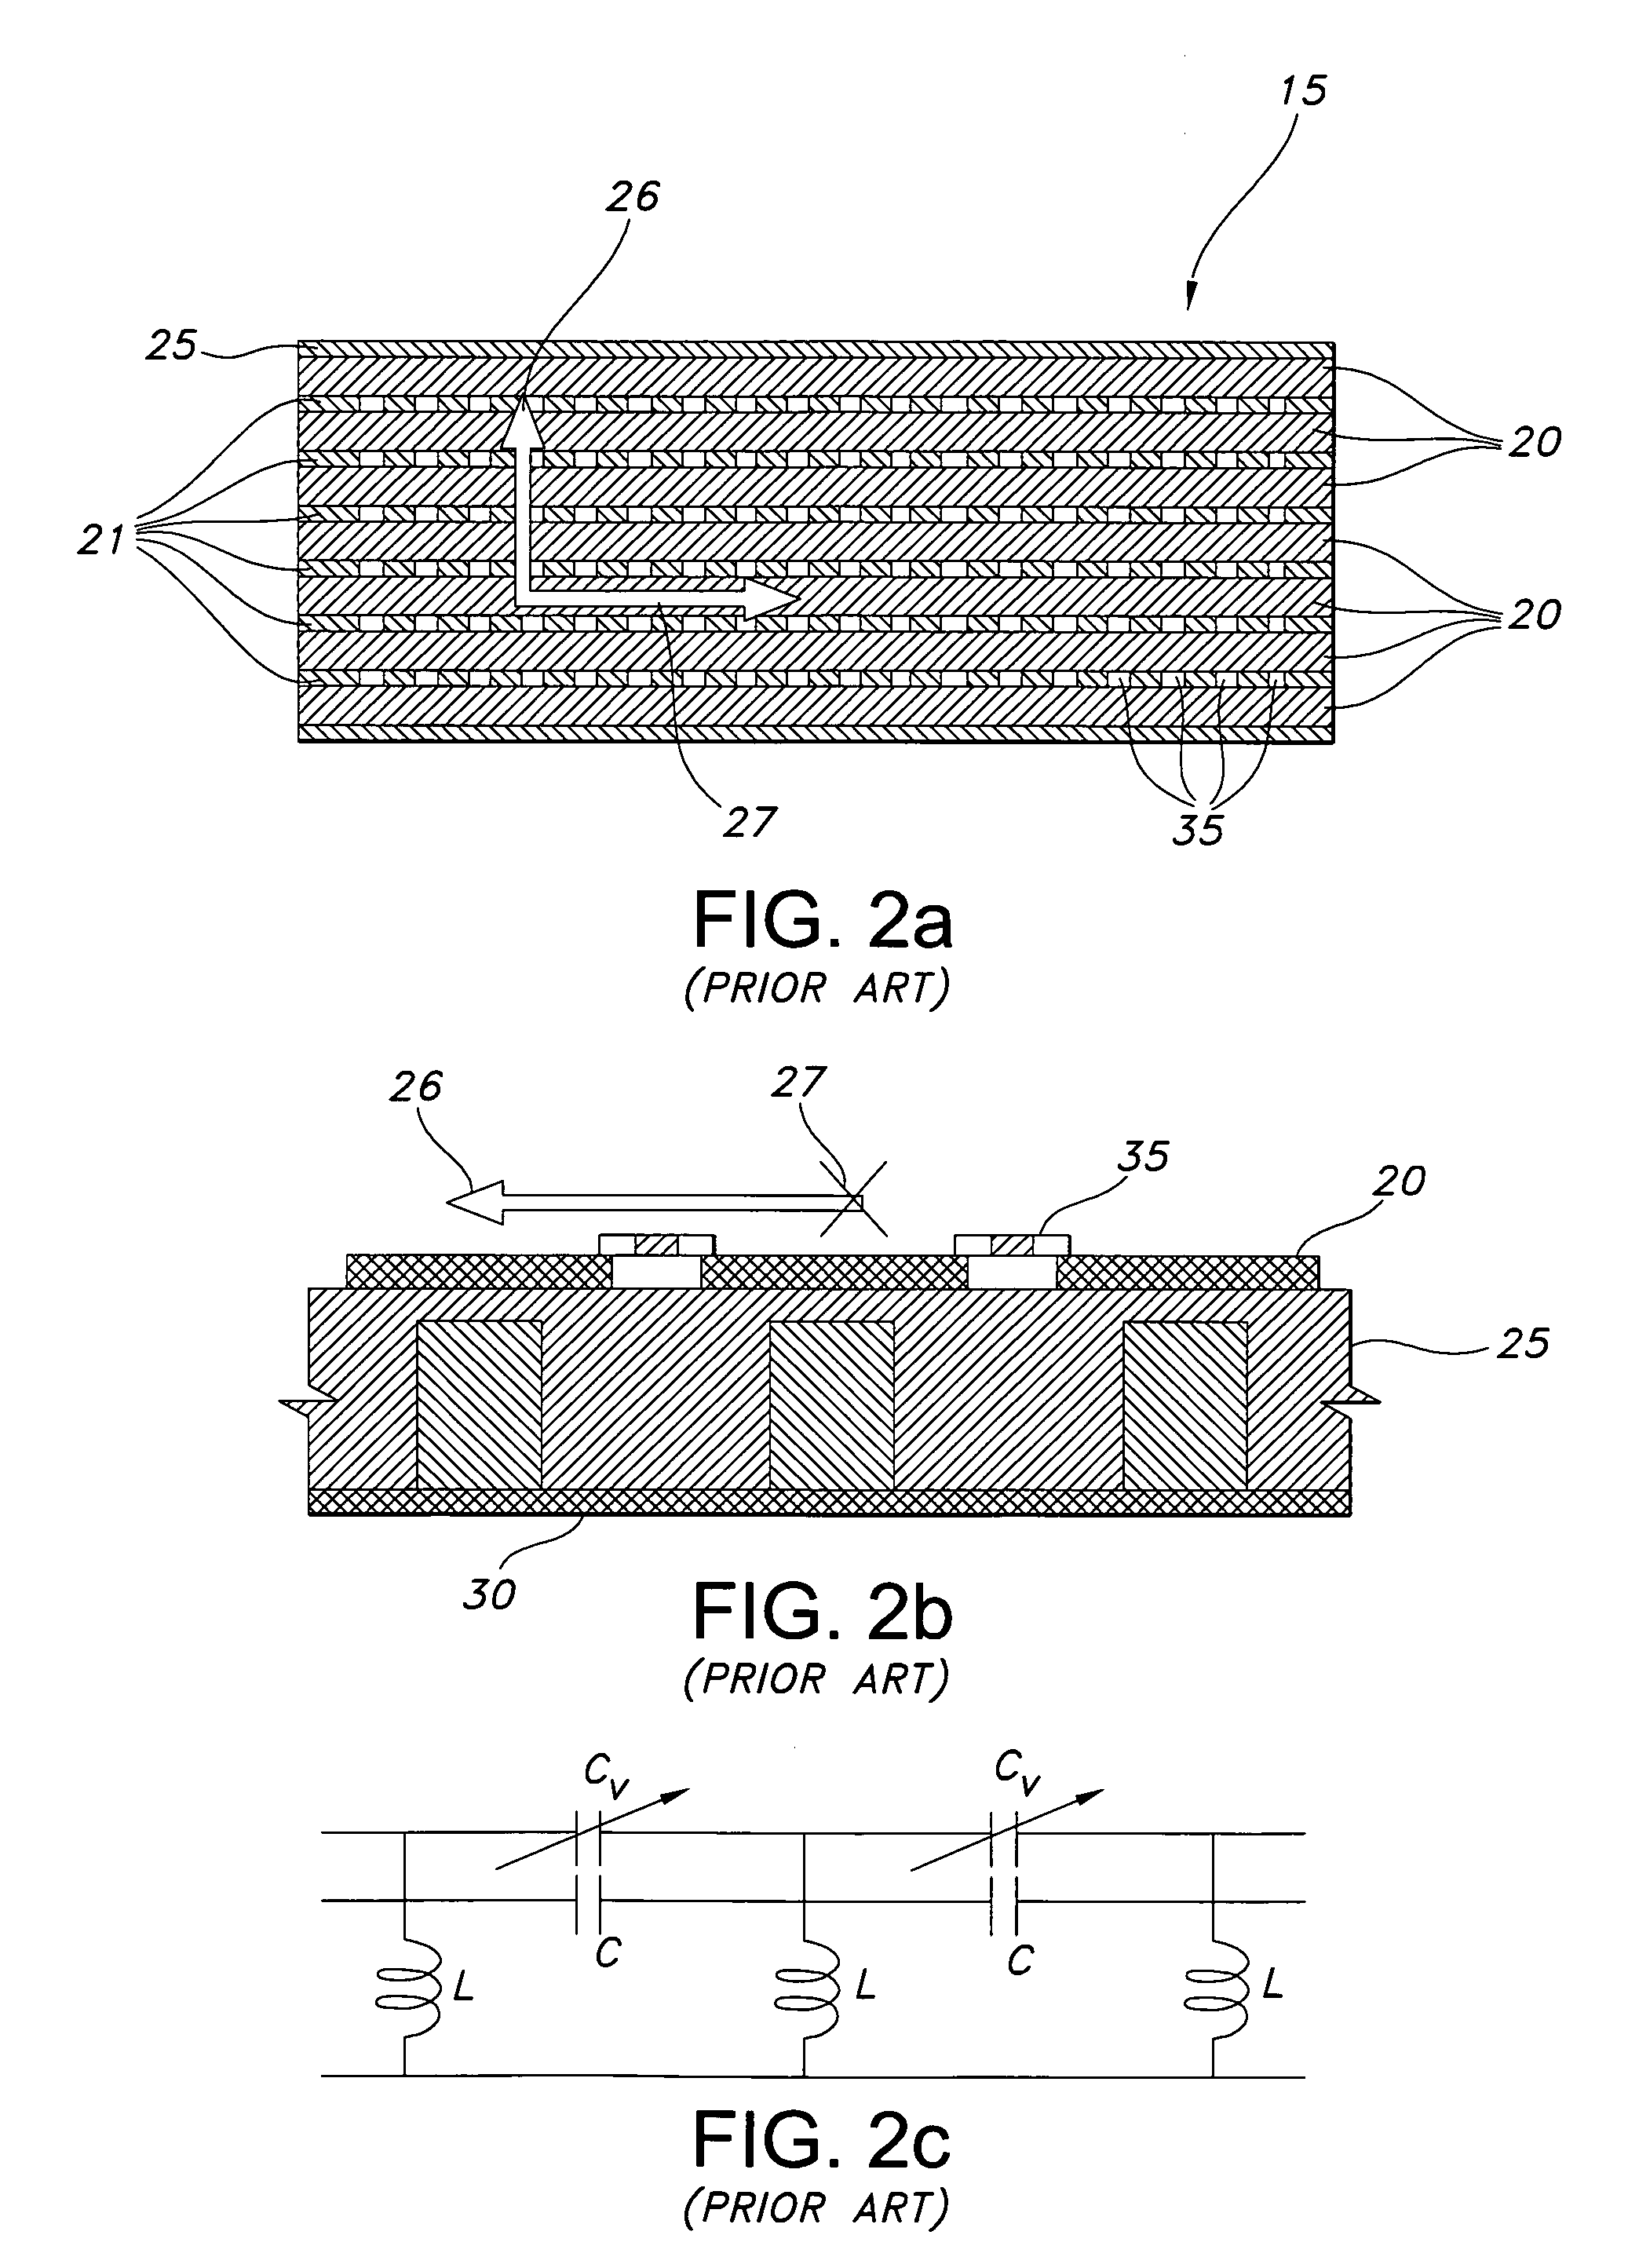 Stacked dual-band electromagnetic band gap waveguide aperture for an electronically scanned array